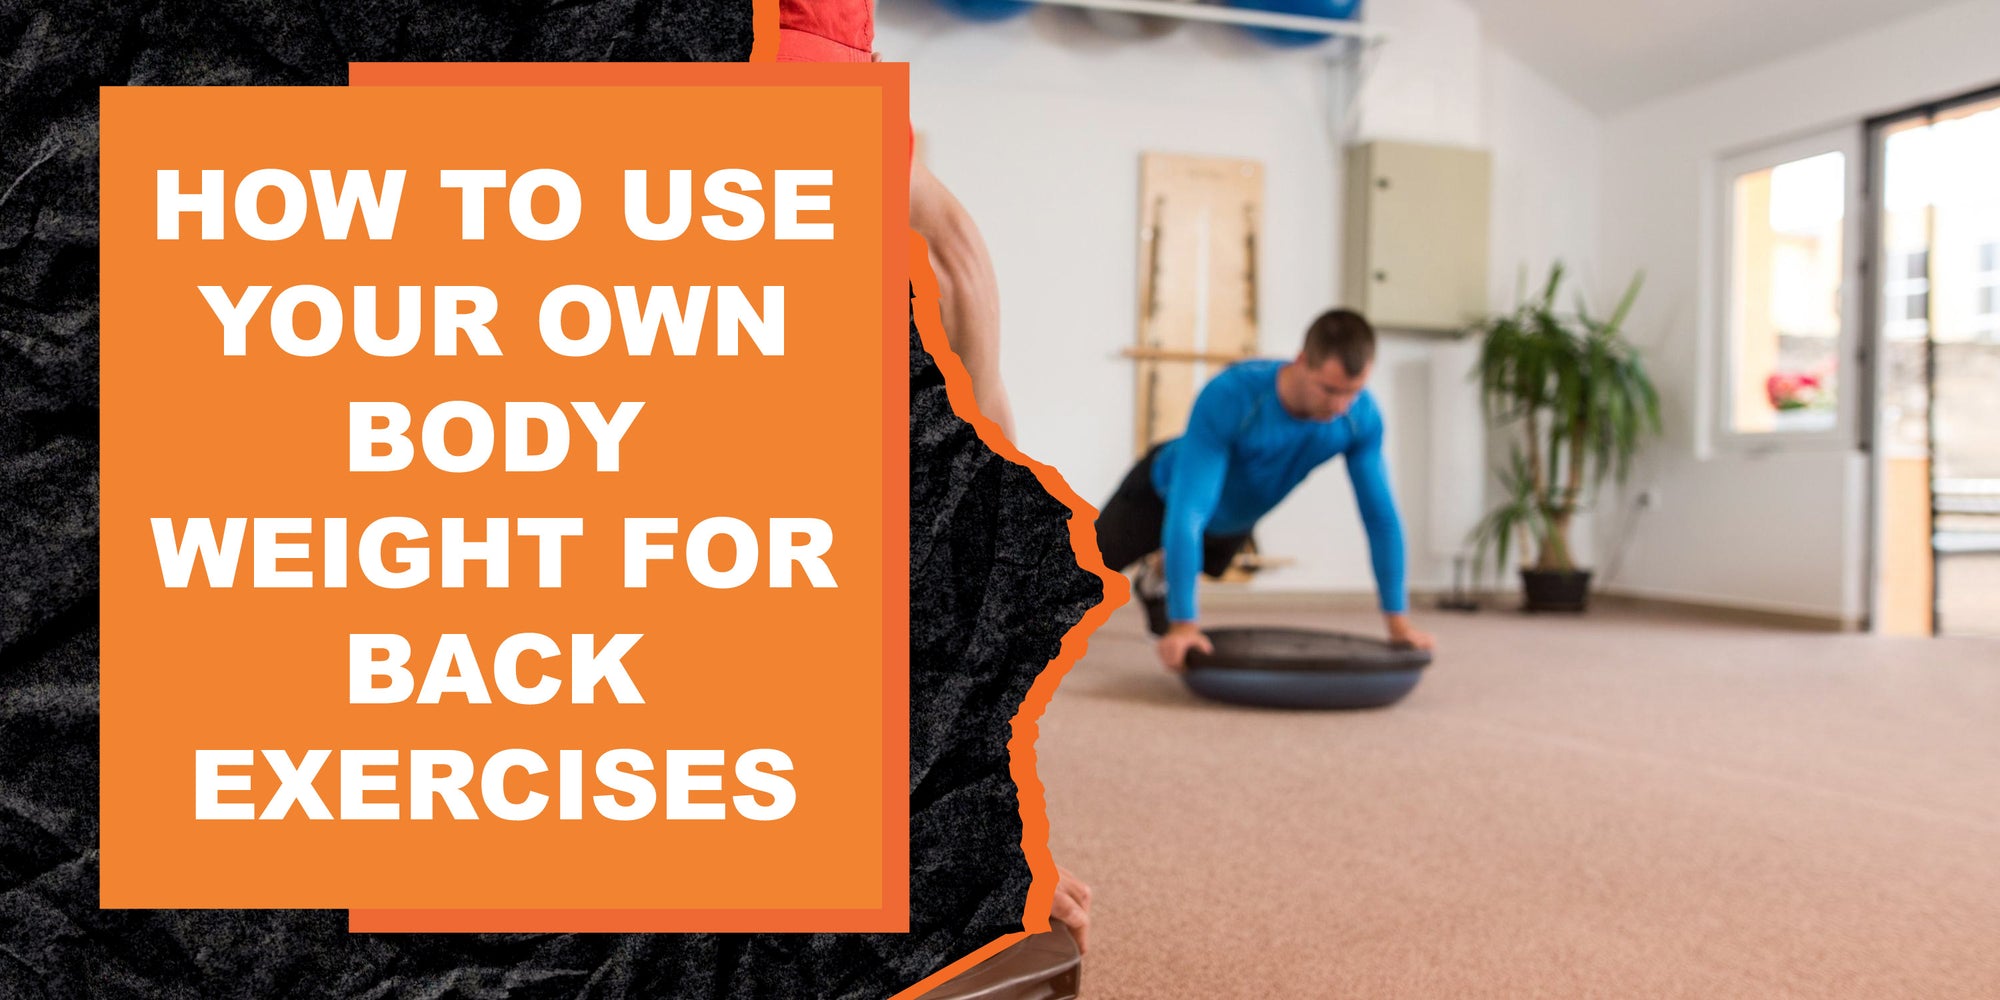 How to Use Your Own Body Weight for Back Exercises